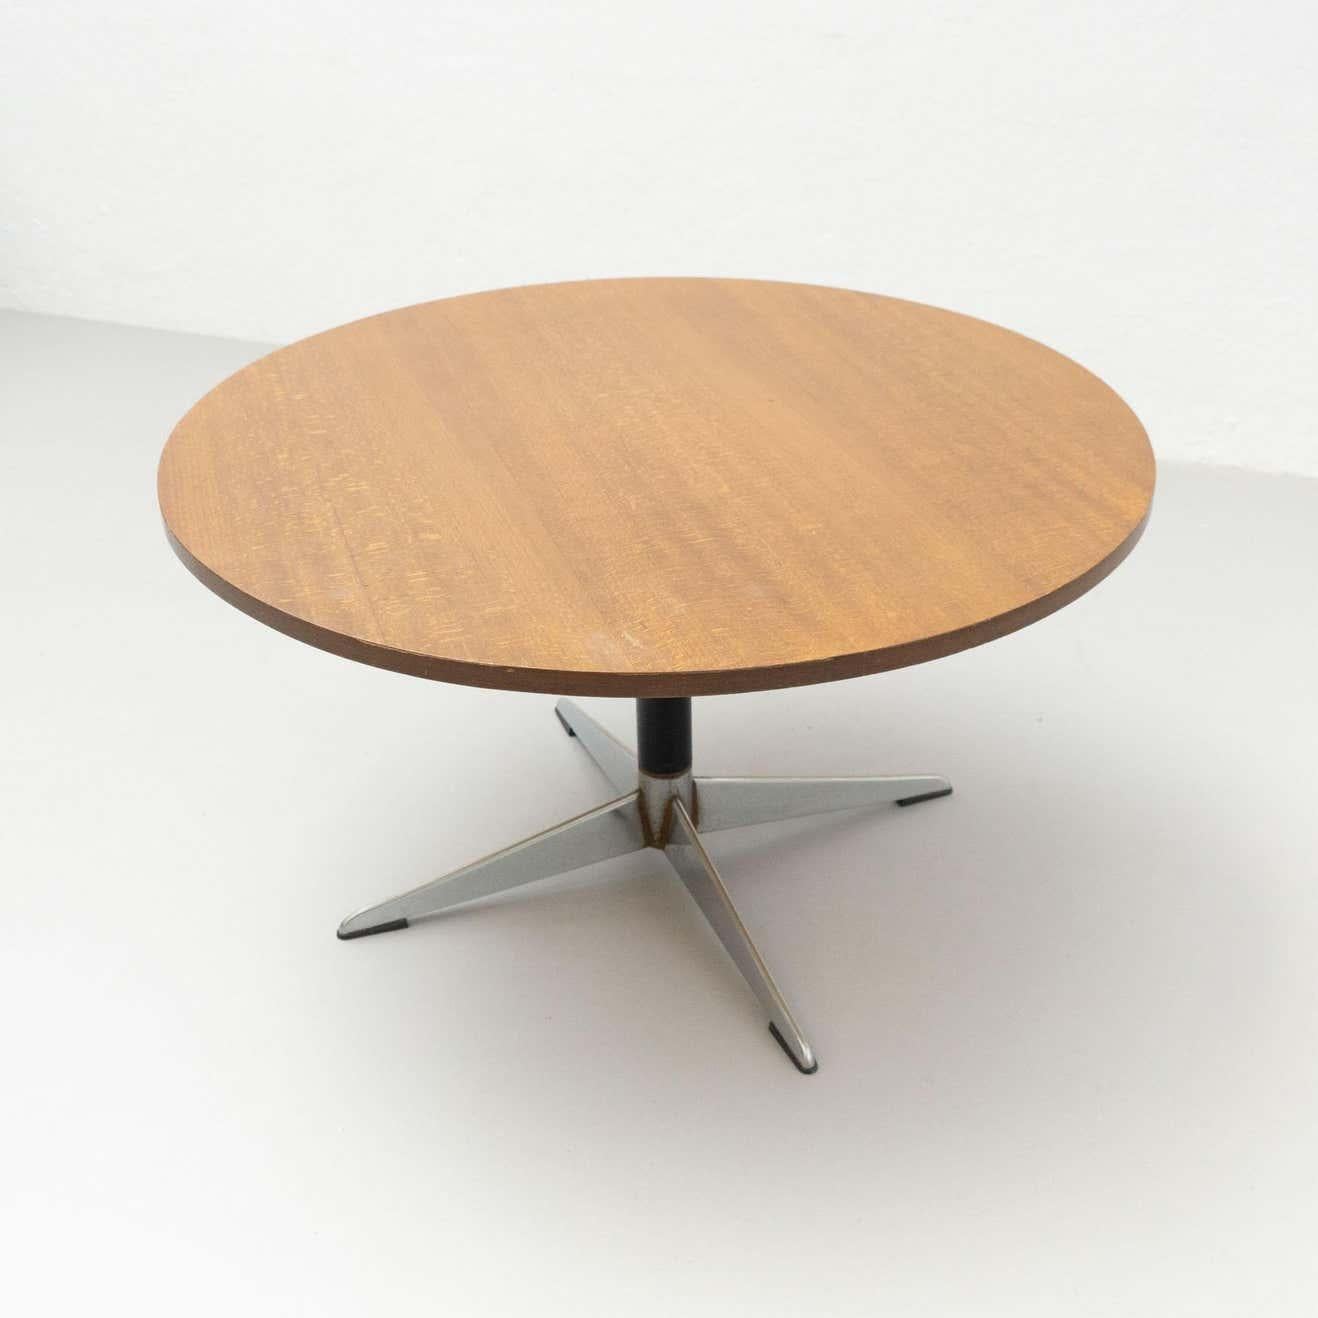 Beechwood and metal side table.
By unknown manufacturer from Spain, circa 1960.

In original condition, with minor wear consistent with age and use, preserving a beautiful patina.

Material:
Wood
Metal

Dimensions:
Ø 80 cm x H 44 cm.